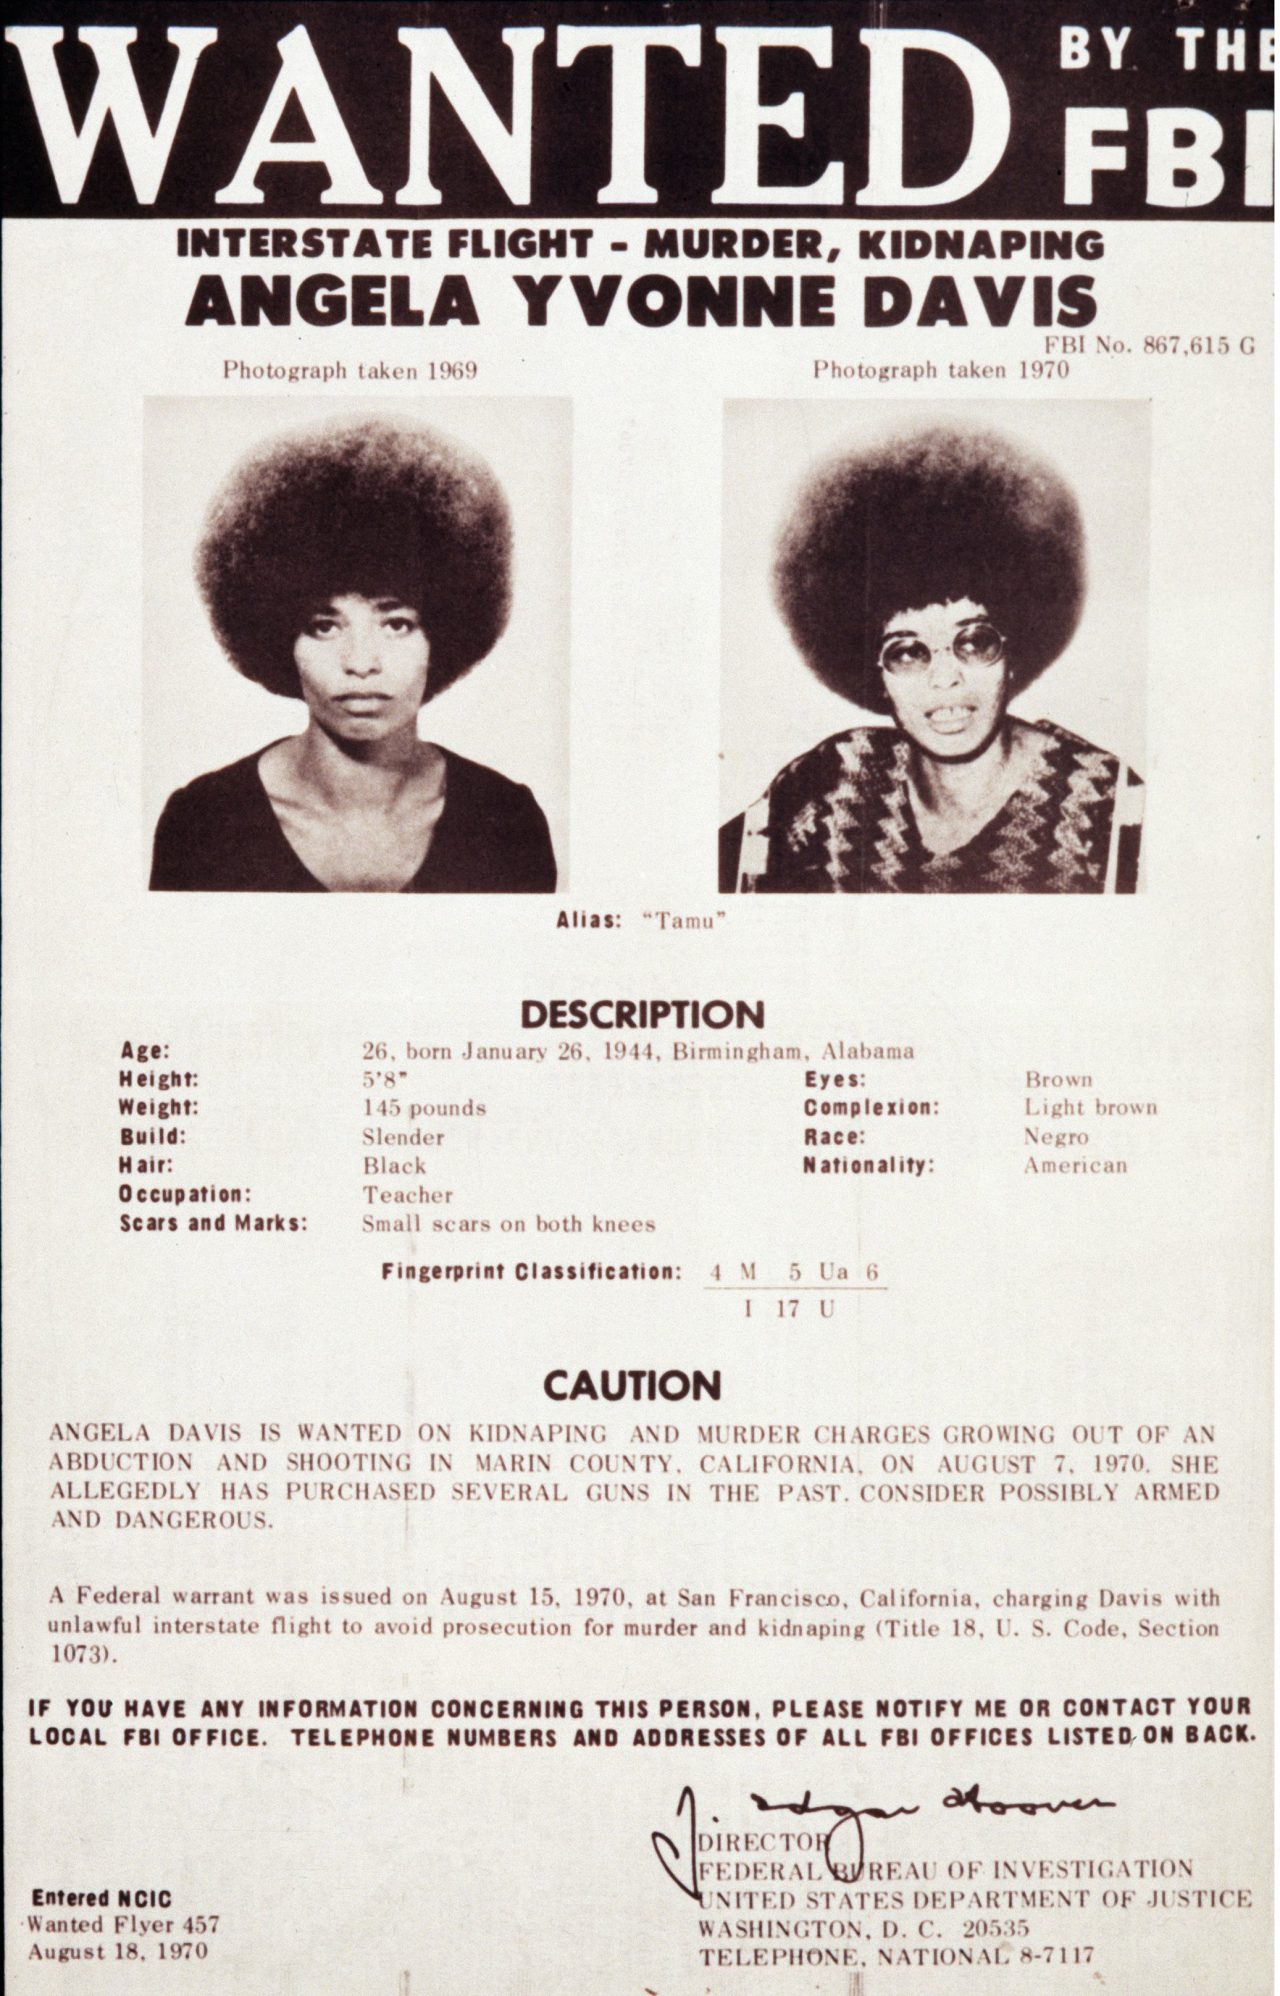 Above: Reprints of the FBI’s “Wanted” poster of Angela Davis graced the walls of many college dorm rooms in the fall of 1970 when Davis was on the run. Top: Three versions of Félix Beltrán’s most famous image of Angela Davis, first printed in Cuba in 1971.